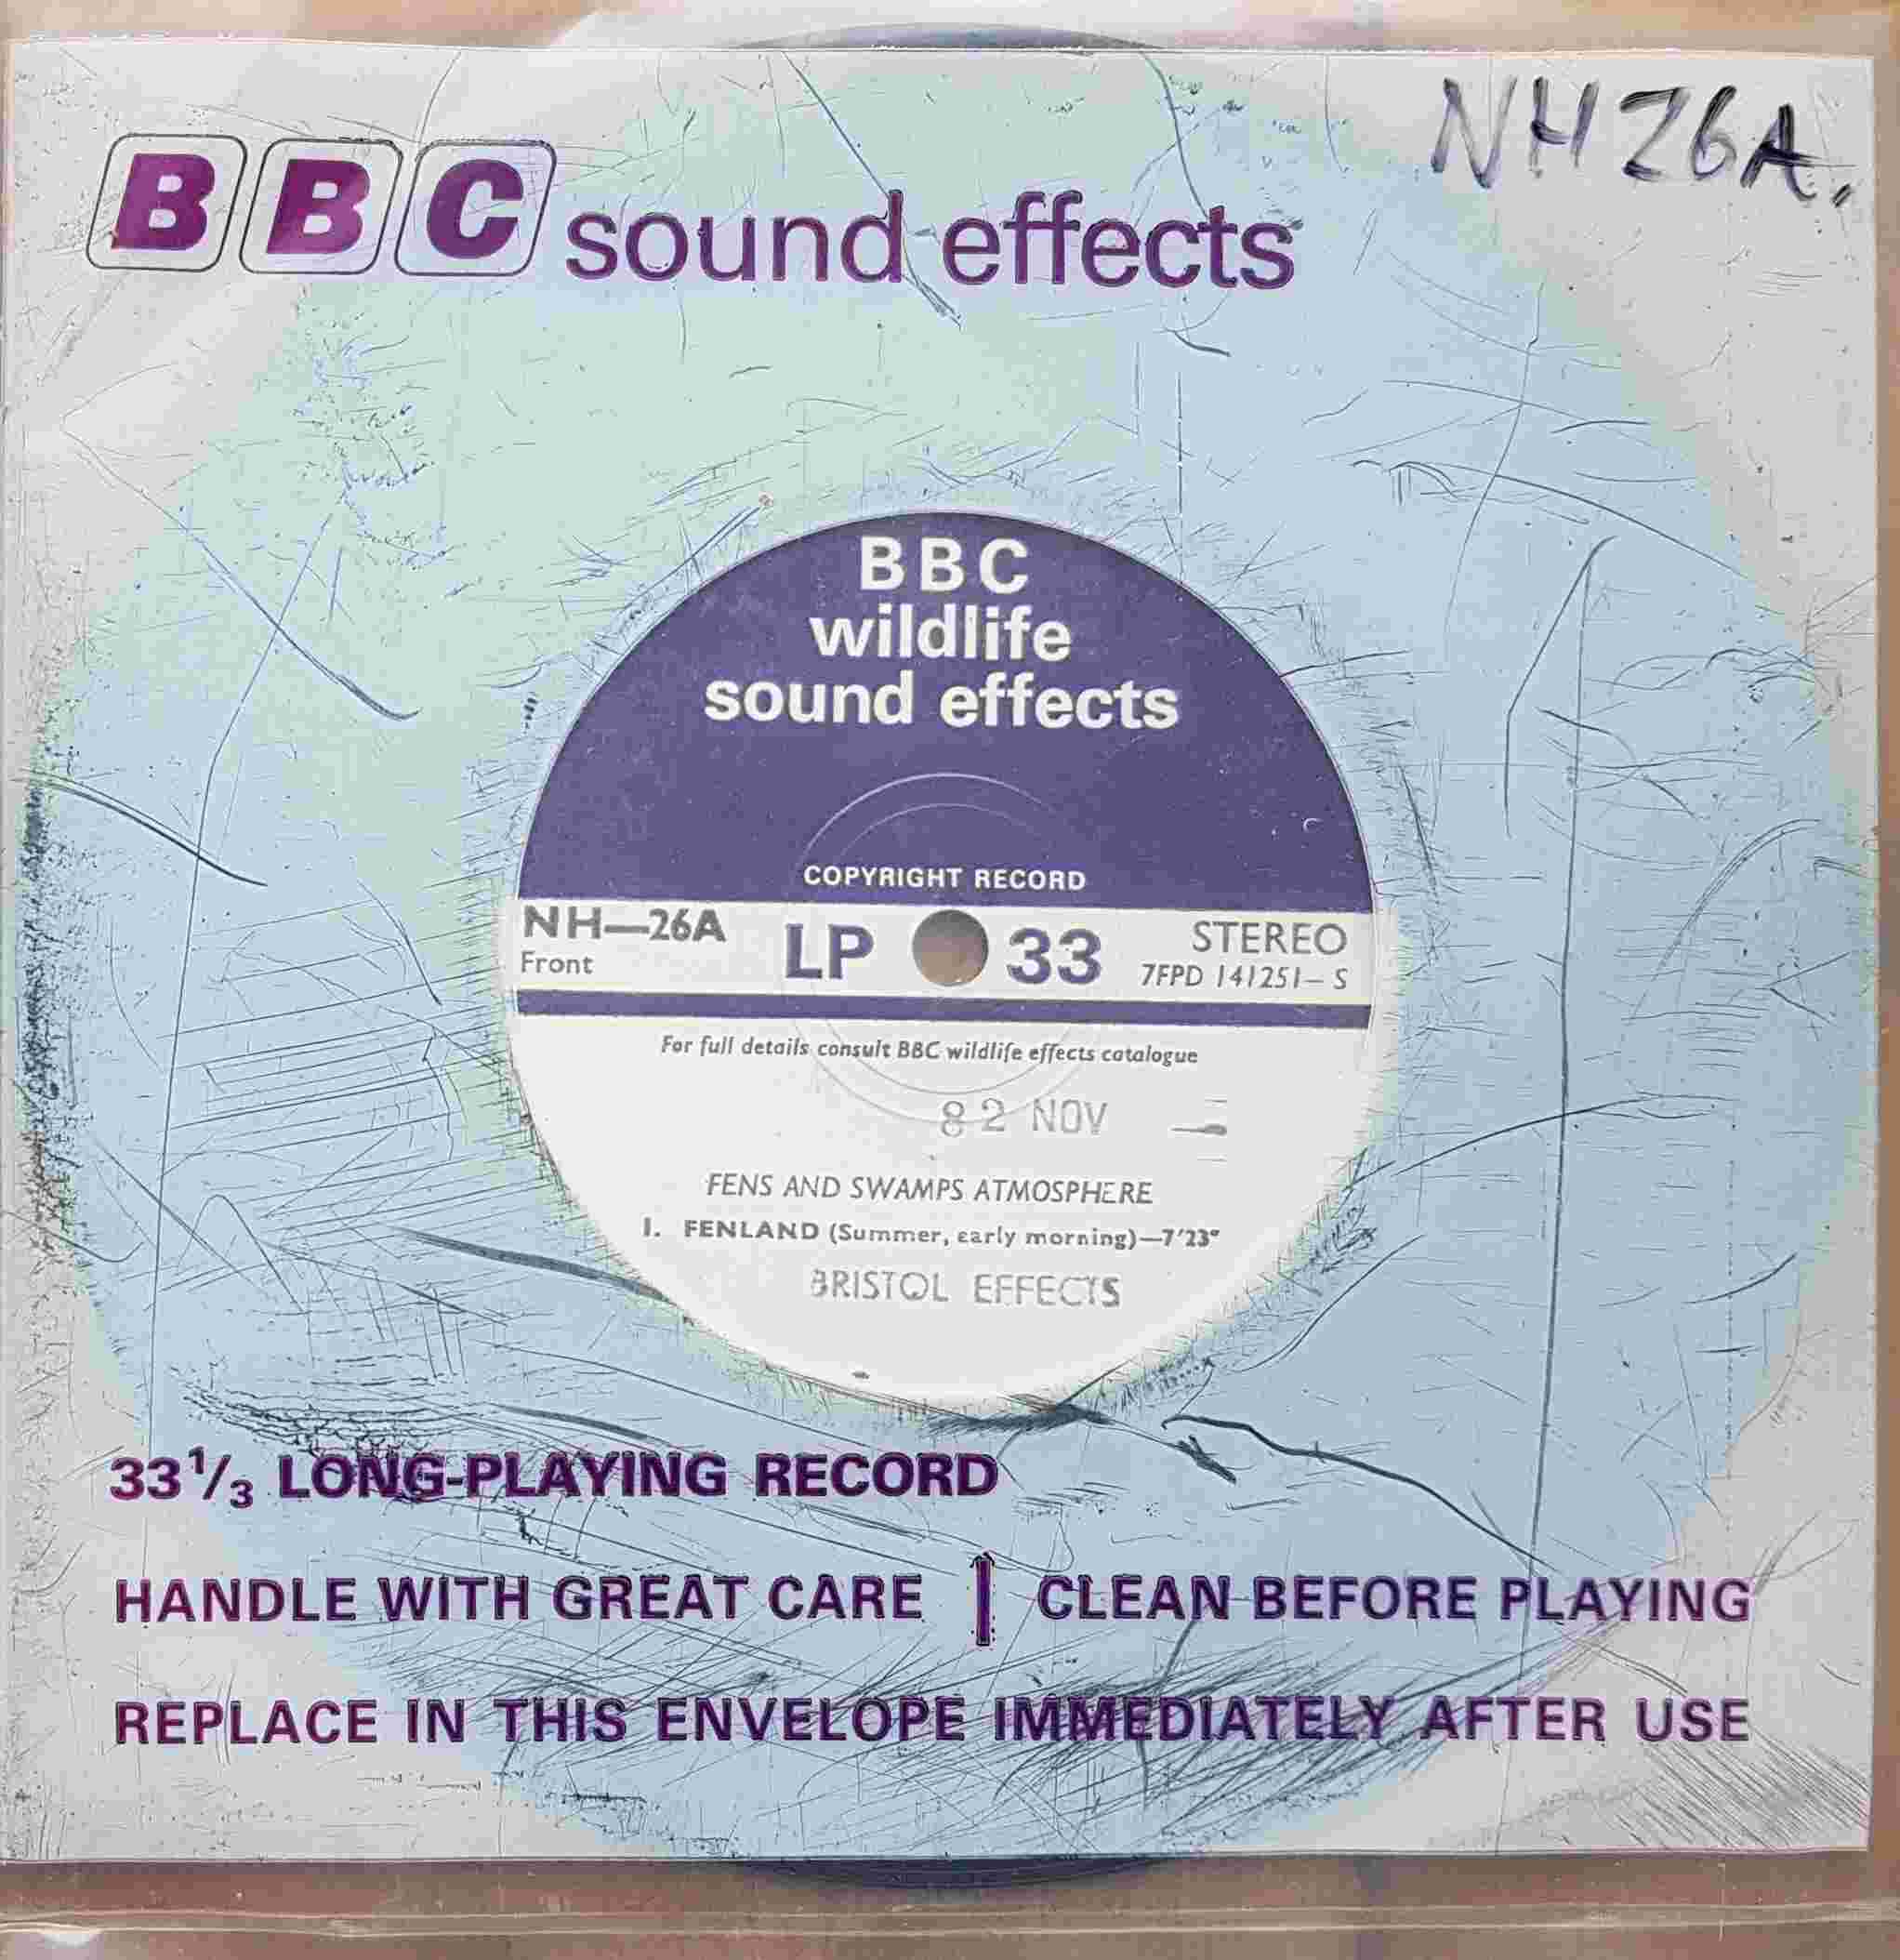 Picture of NH 26A Fens and swamps atmosphere / River atmosphere by artist Not registered from the BBC records and Tapes library